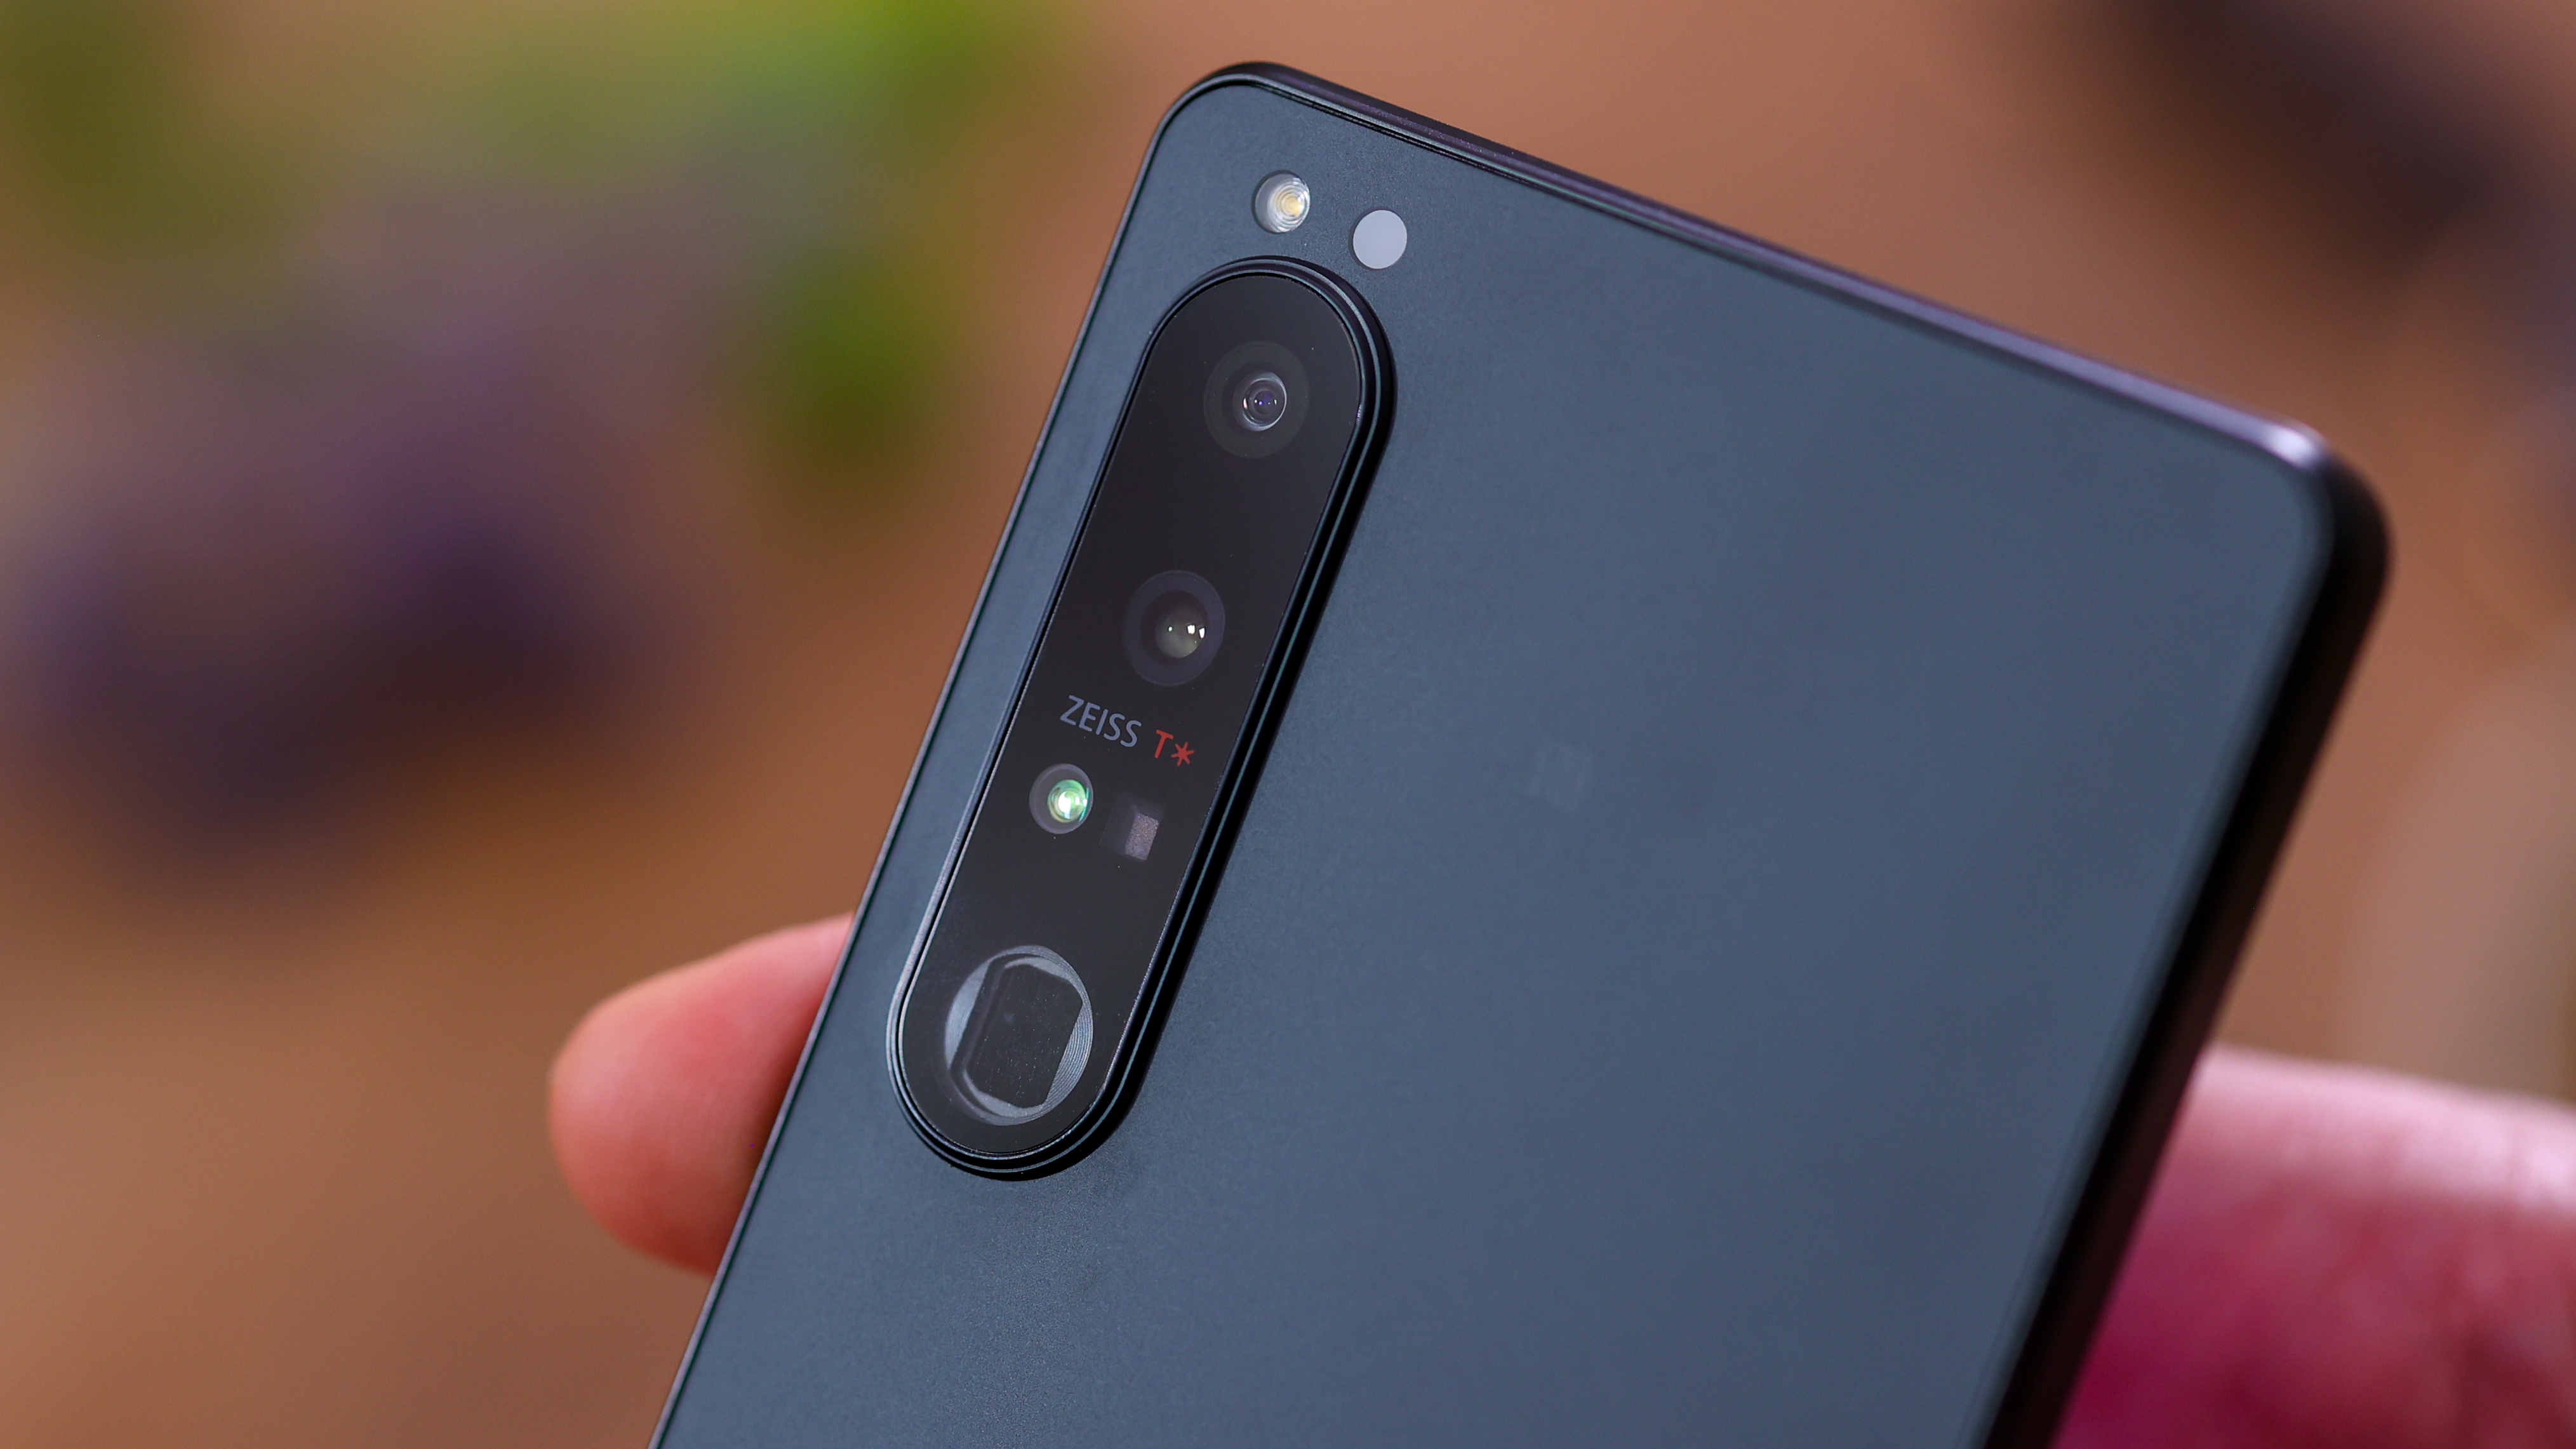 Sony announces Xperia 1 IV smartphone with true optical zoom, 4K/120p HDR  video: Digital Photography Review